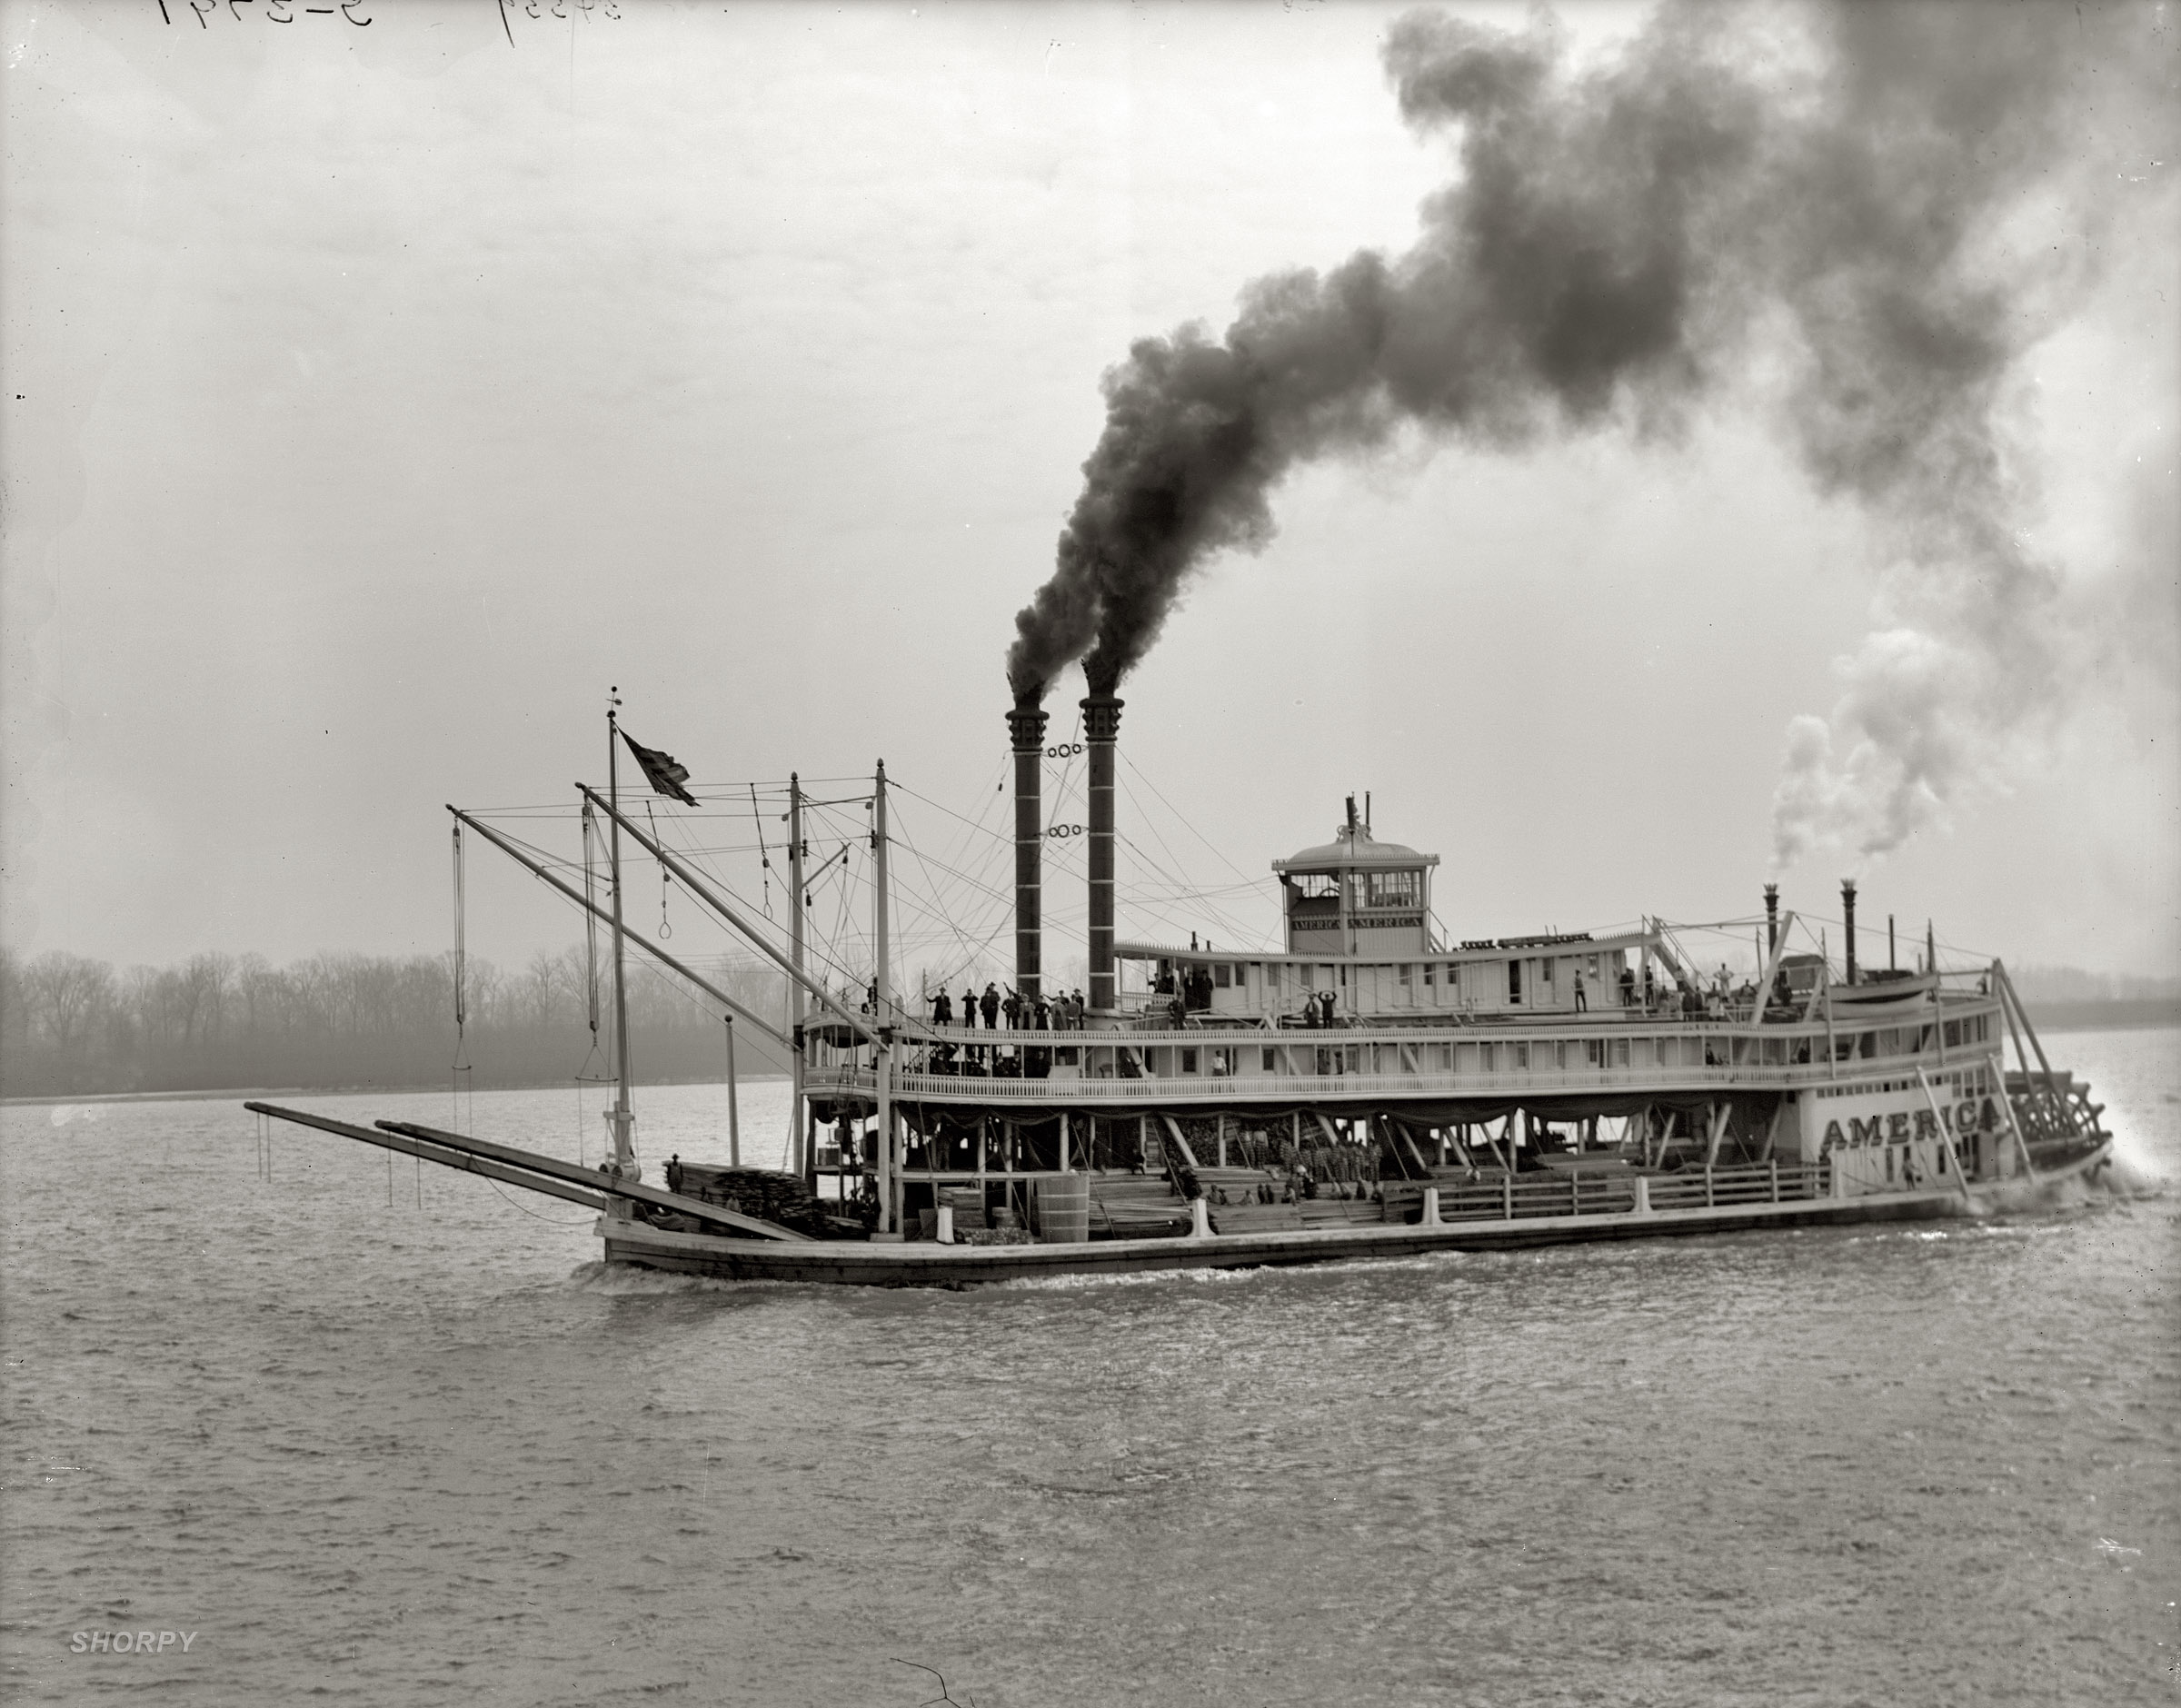 "America, Mississippi riverboat, circa 1900-1910." Note the group of convicts in prison stripes. Detroit Publishing Company glass negative. View full size.